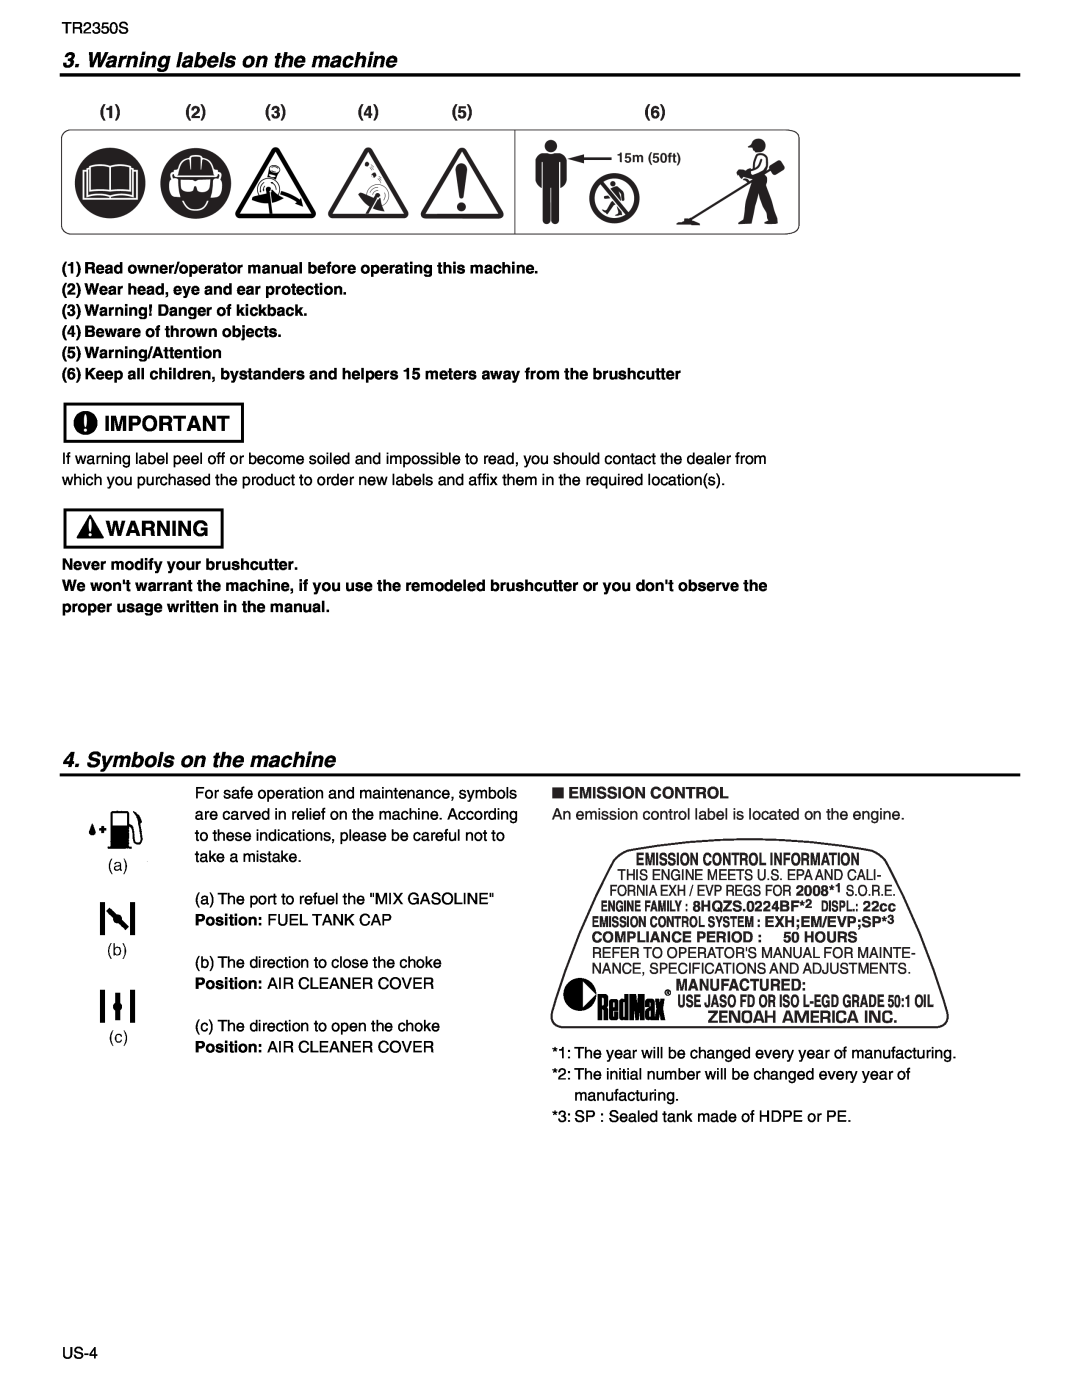 RedMax TR2350S manual Warning labels on the machine, Symbols on the machine, Emission Control Information 